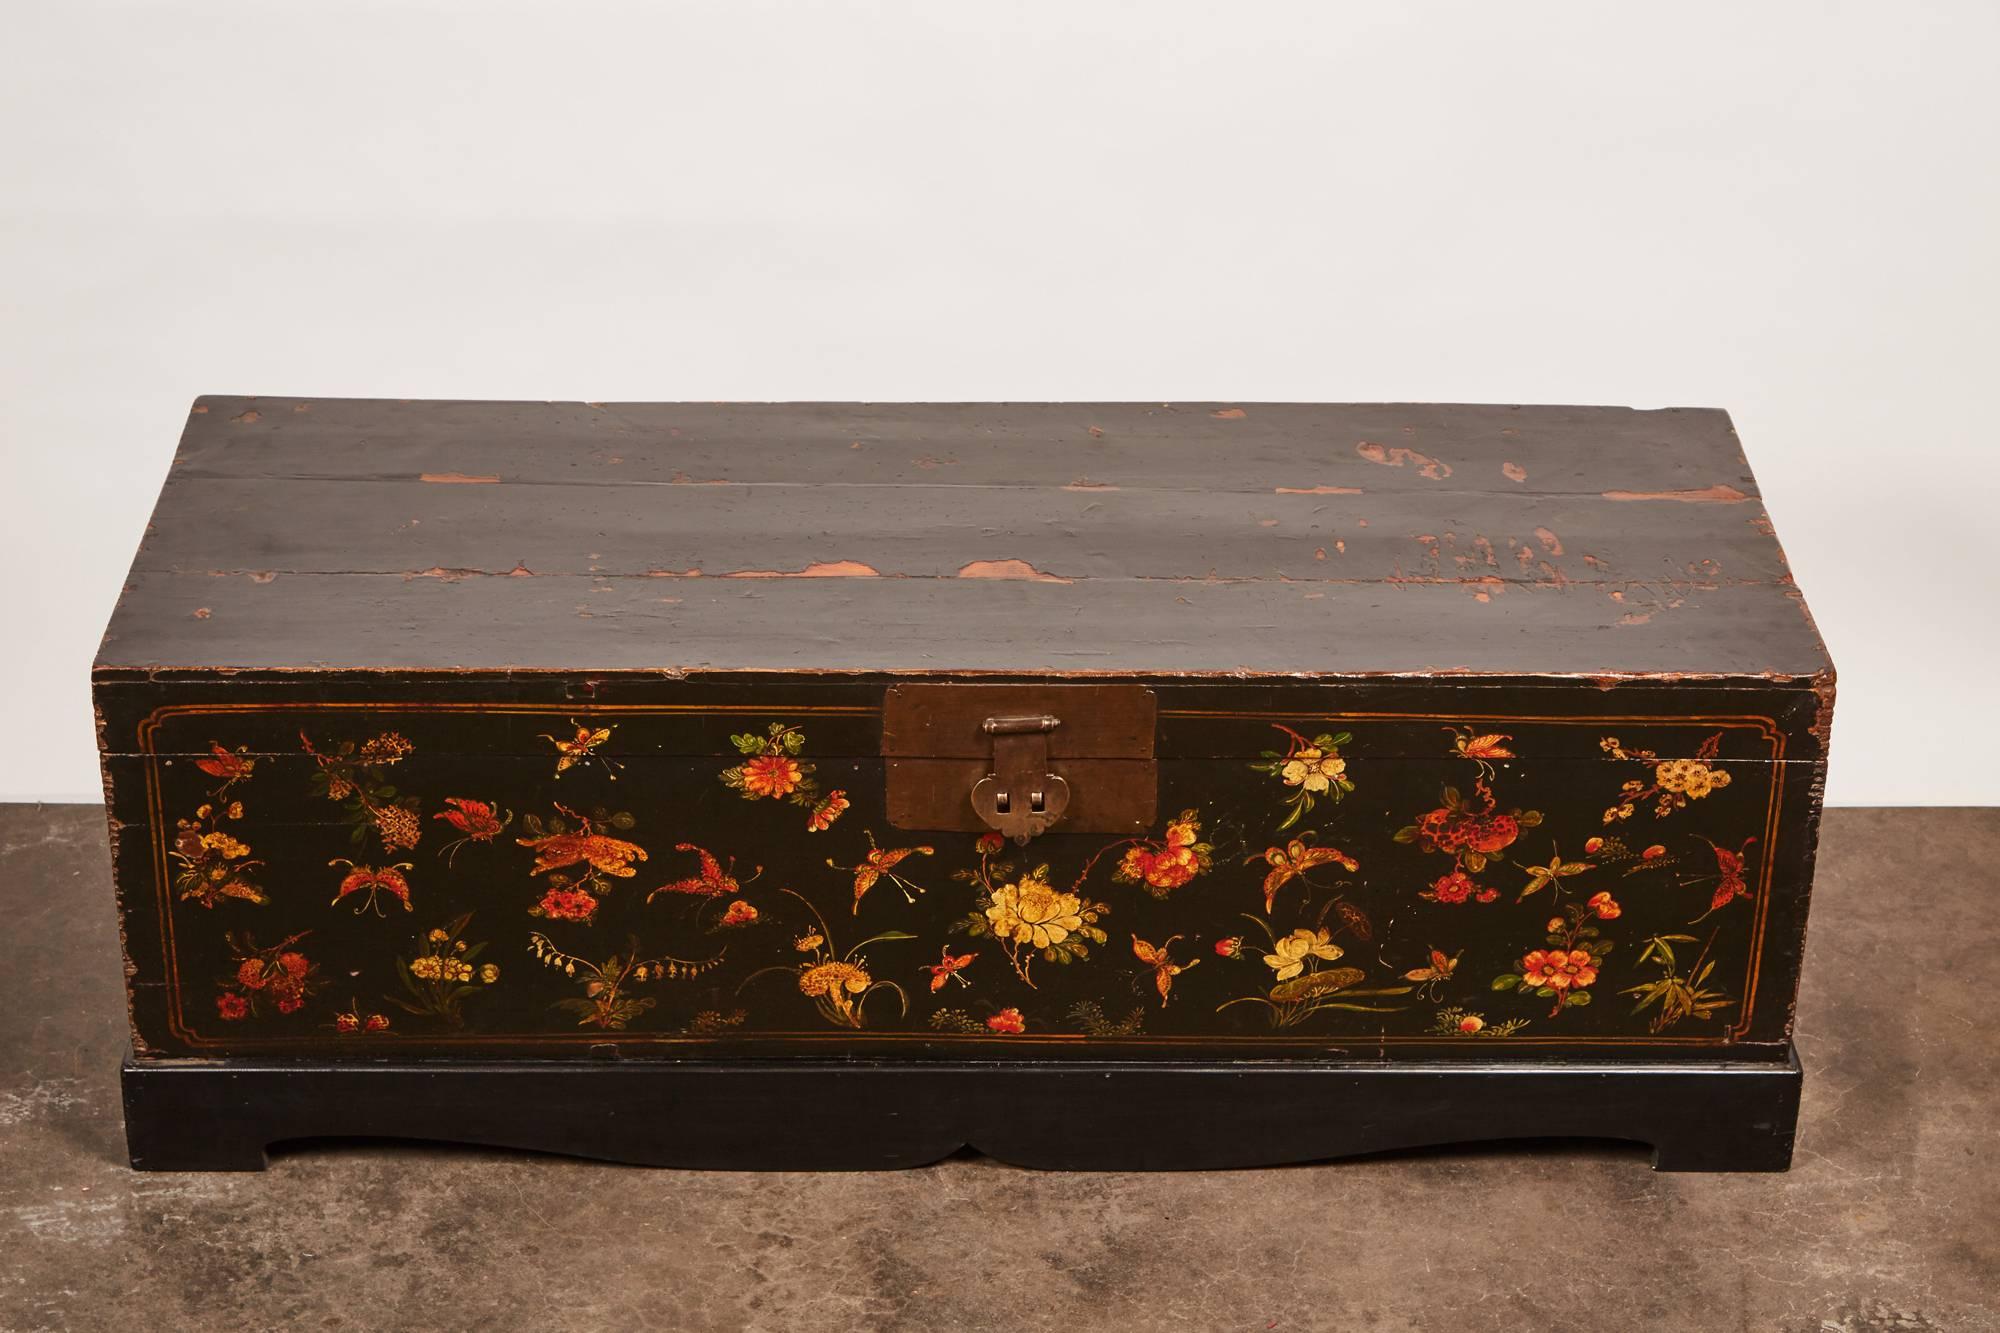 This 19th century lacquer painted Chinese trunk is designed with stunning butterfly motifs along the facade. The lengthy trunk does not only feature the butterfly motif, meant to represent happiness, but also includes a variety of flower types. This